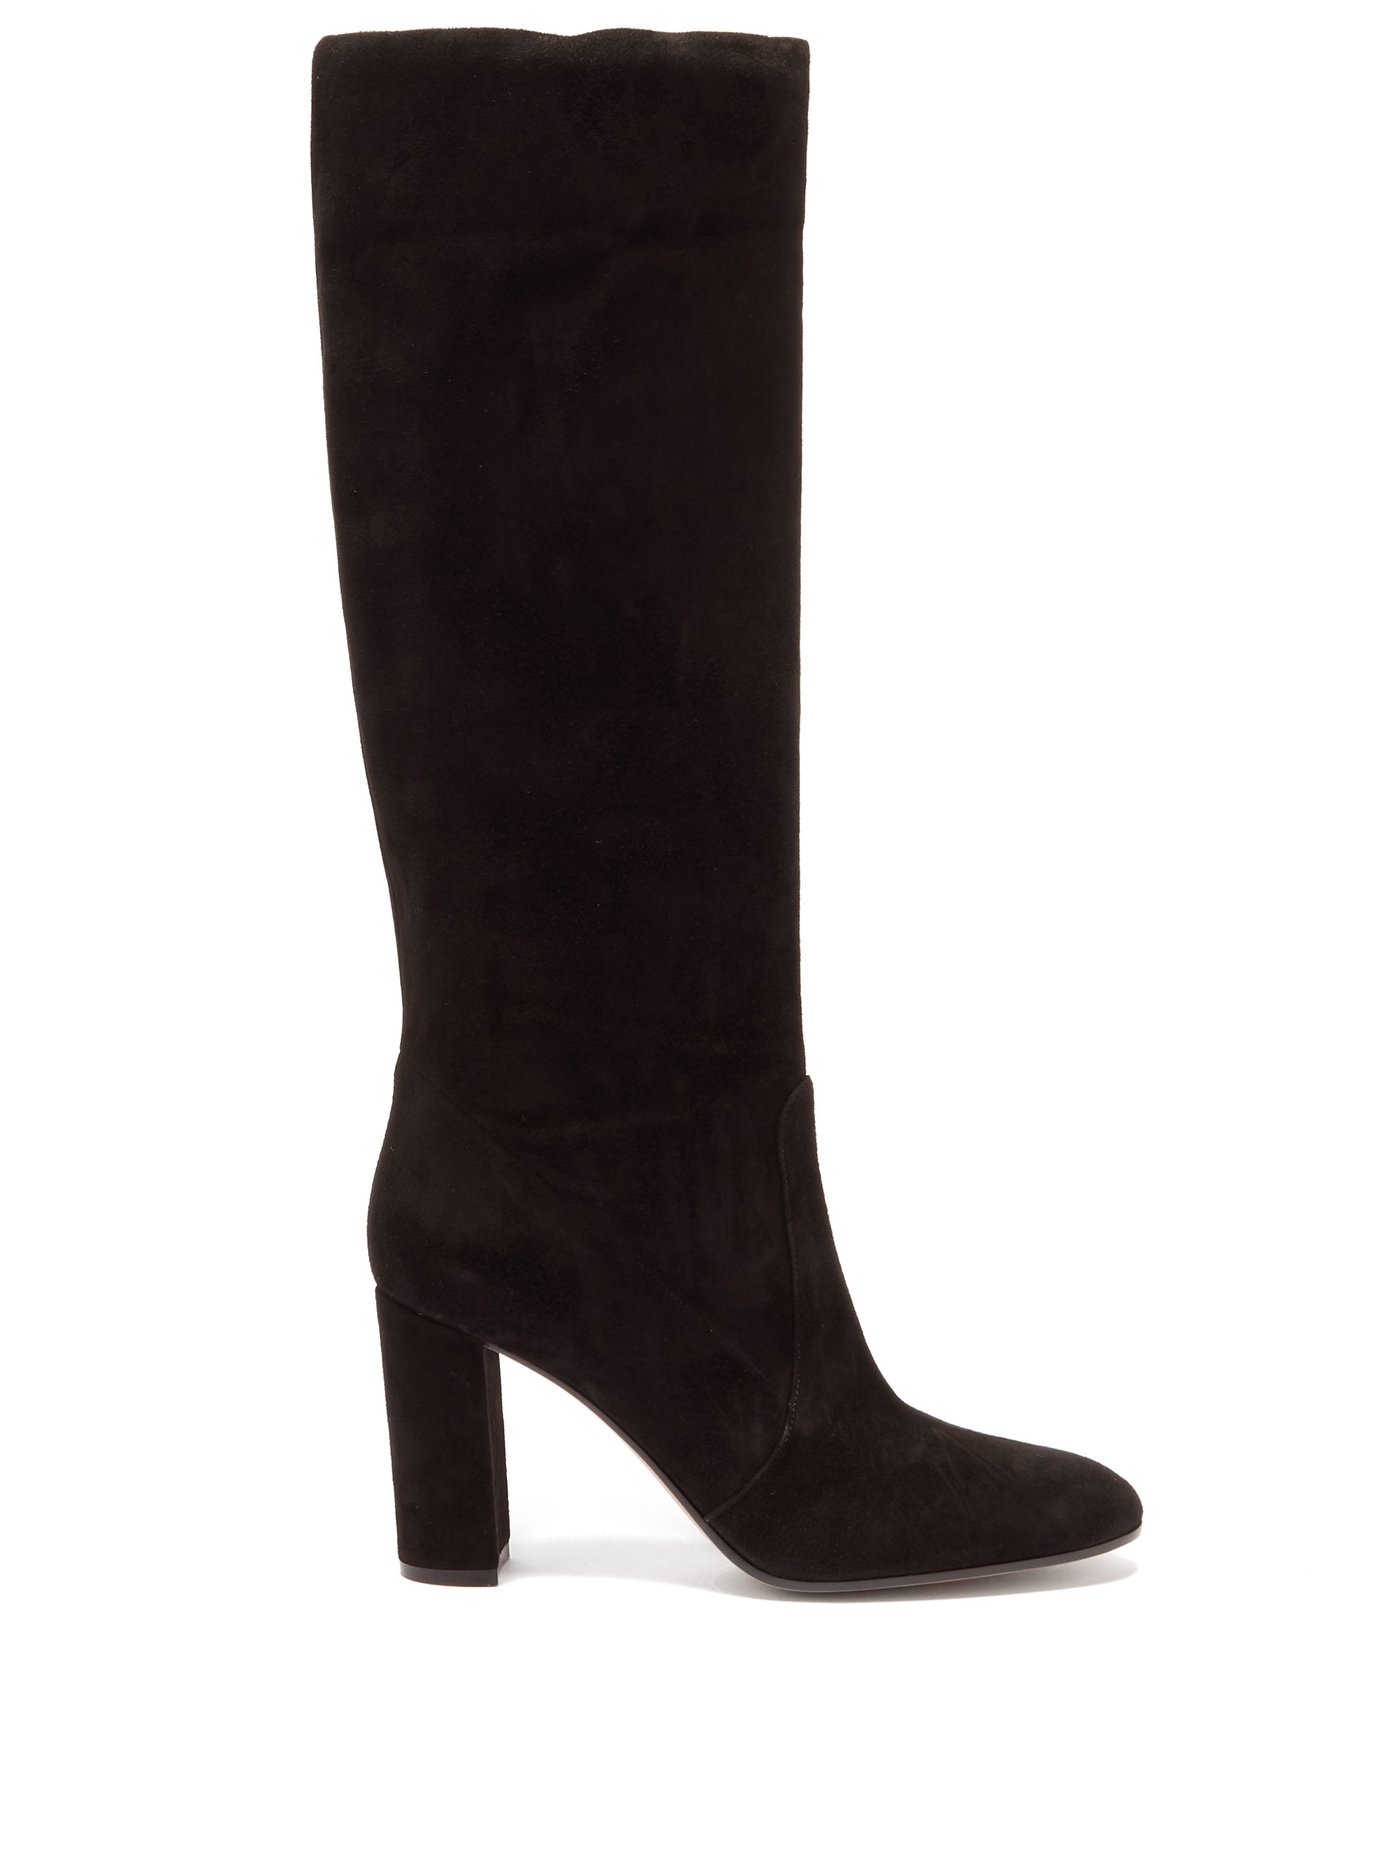 gianvito rossi suede knee boots